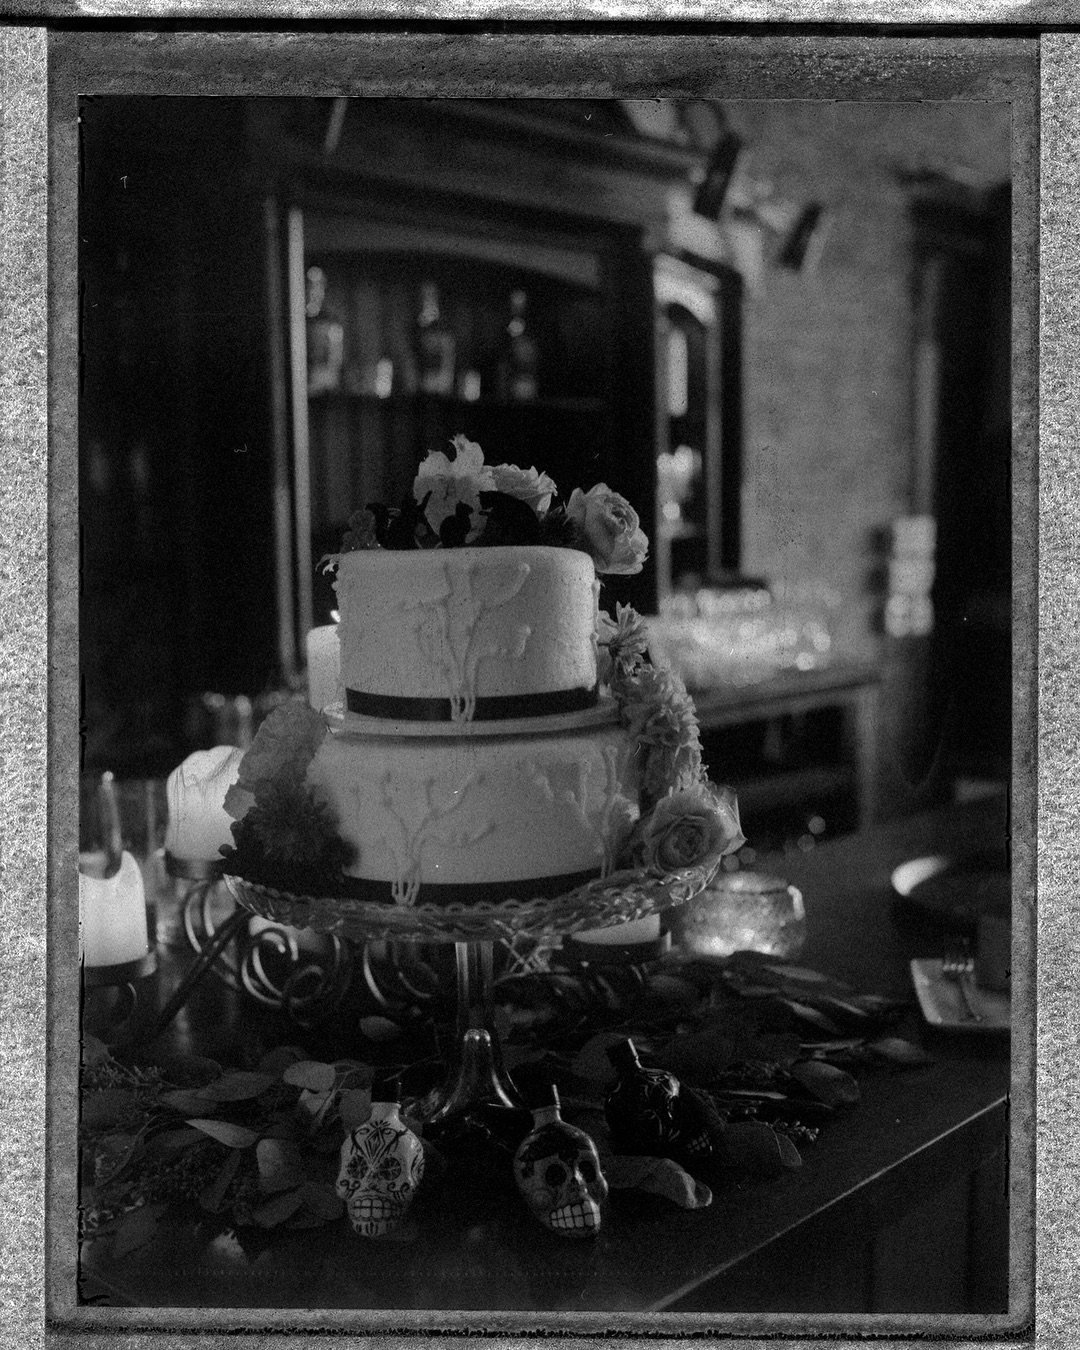 Wedding cake. My sister got married last month. I brought my Polaroid 195 and some FP3000-B. #polaroidweek #polaroidweek2018 #roidweek #roidweek2018 #polaroid #goop #fp3000b #film #filmphotography #filmphotographic